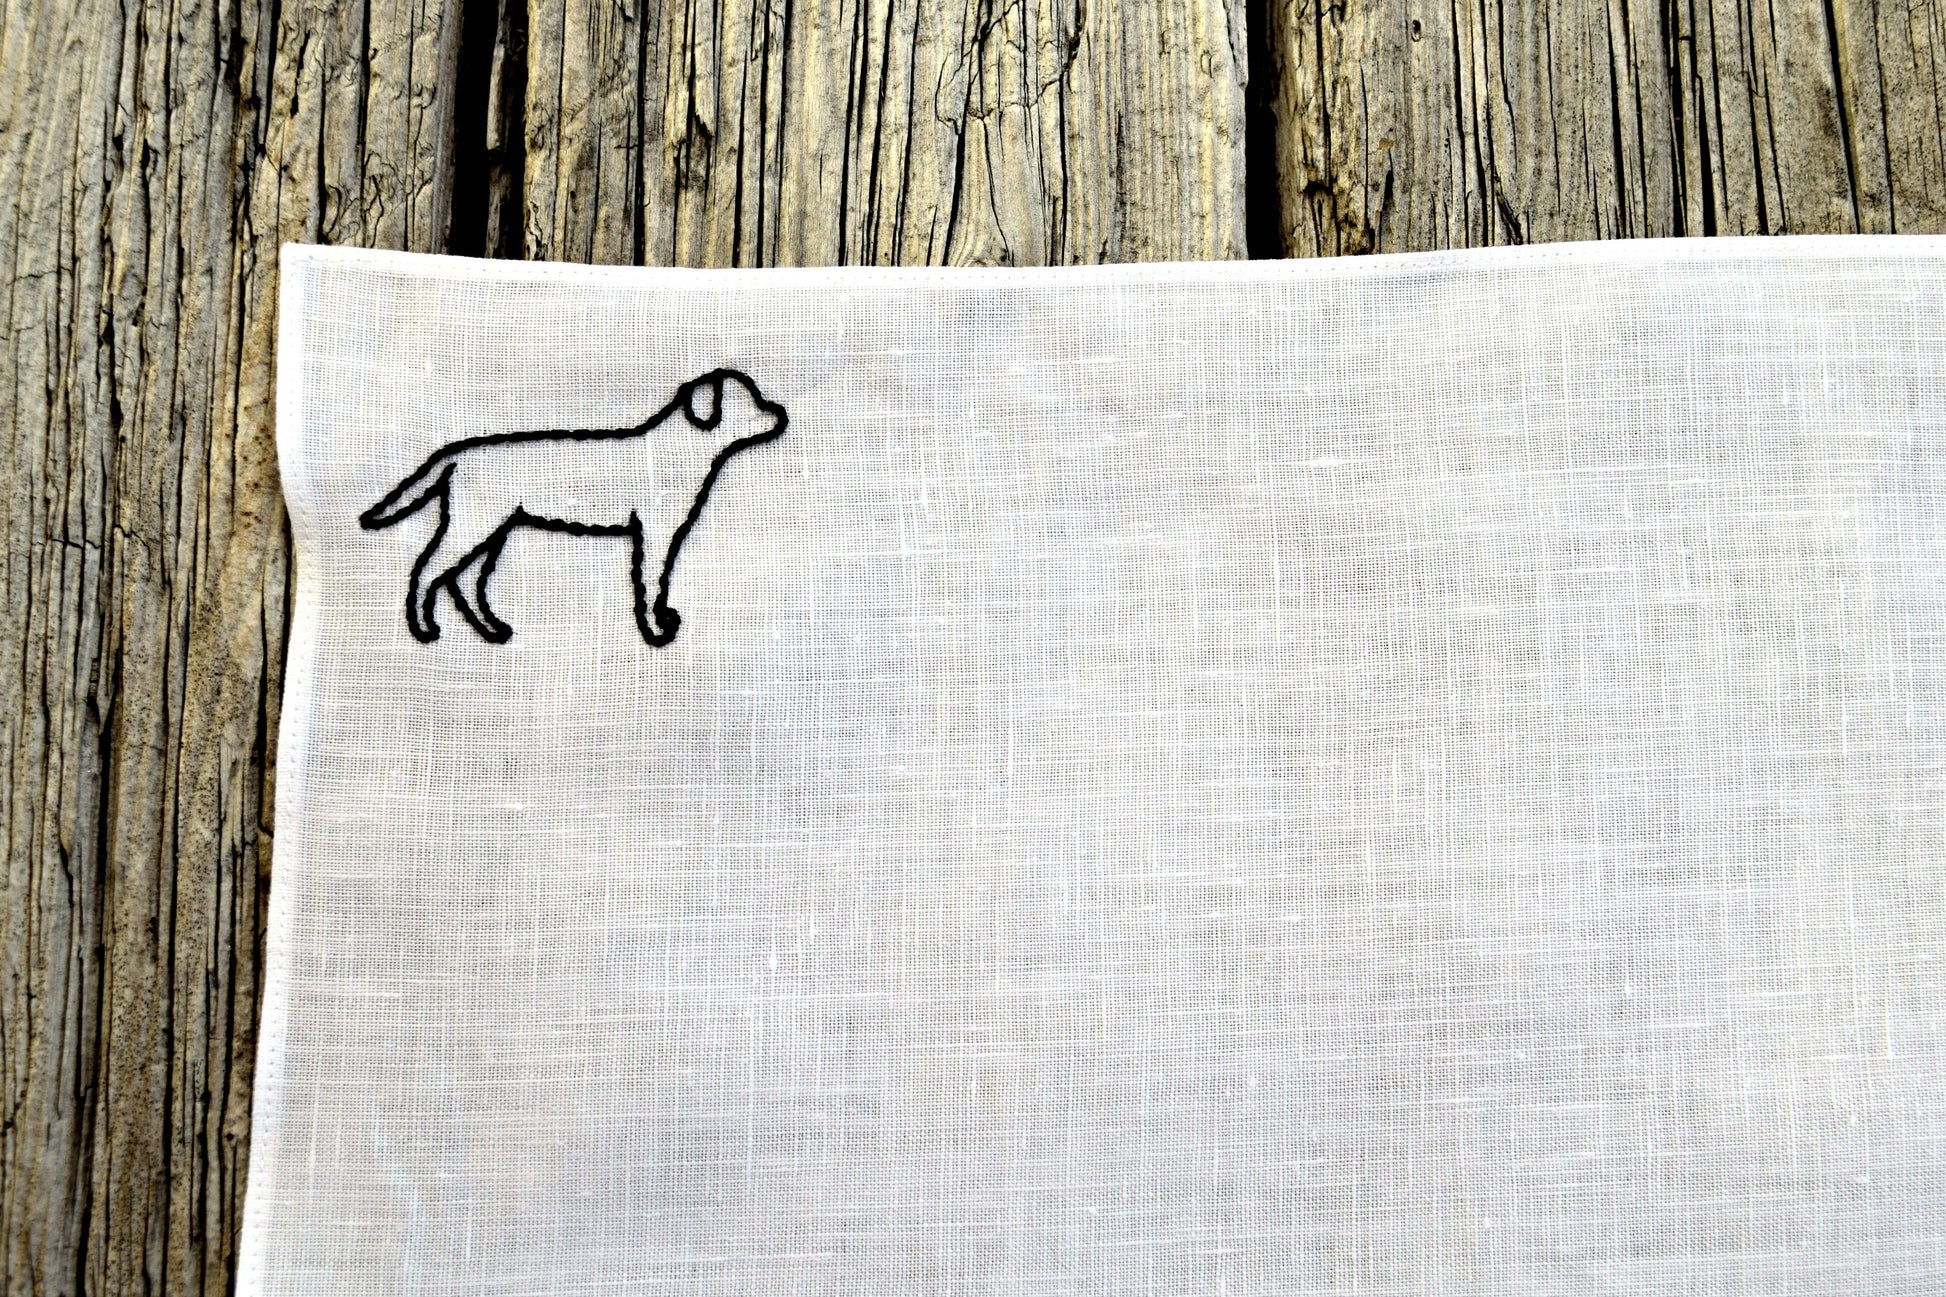 Corner of white linen handkerchief hand embroidered with a black labrador silhouette